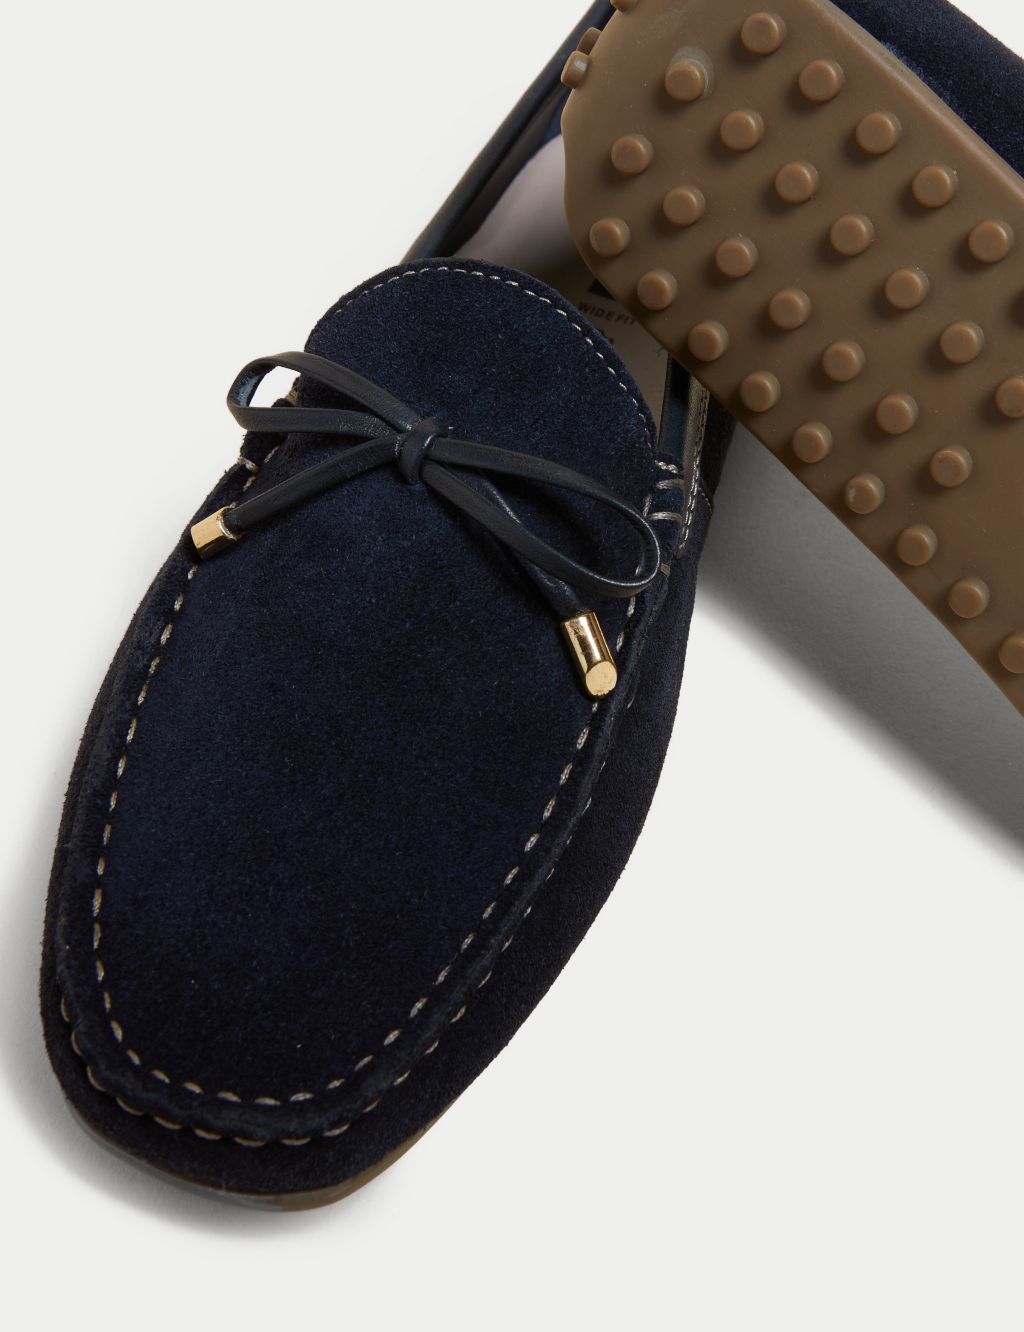 Wide Fit Suede Bow Boat Shoes image 4